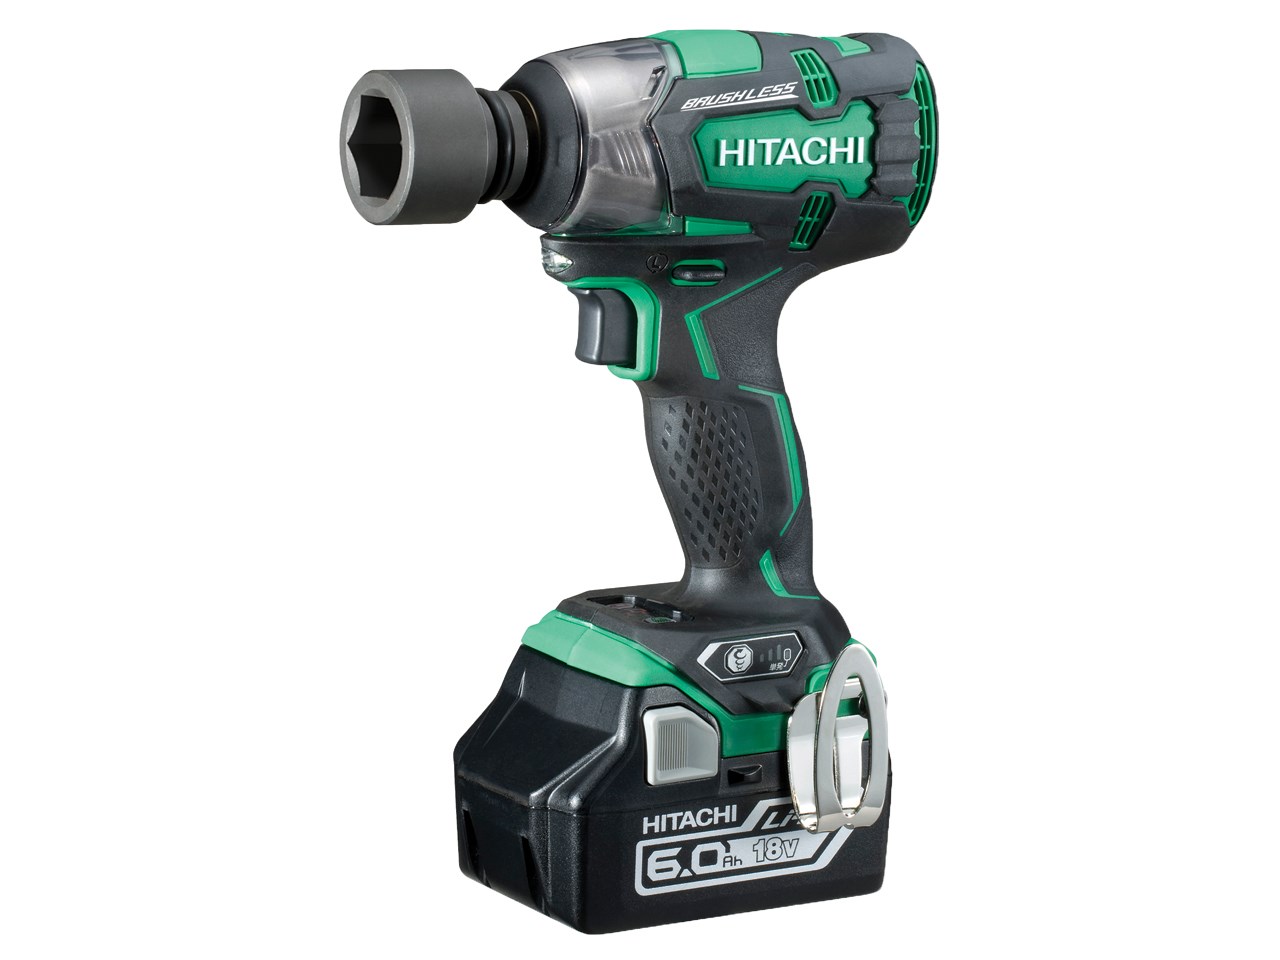 HITACH 18V BRUSHLESS IMPACT WRENCH WITH 2 X 6AMP LI-ION BATTERIES